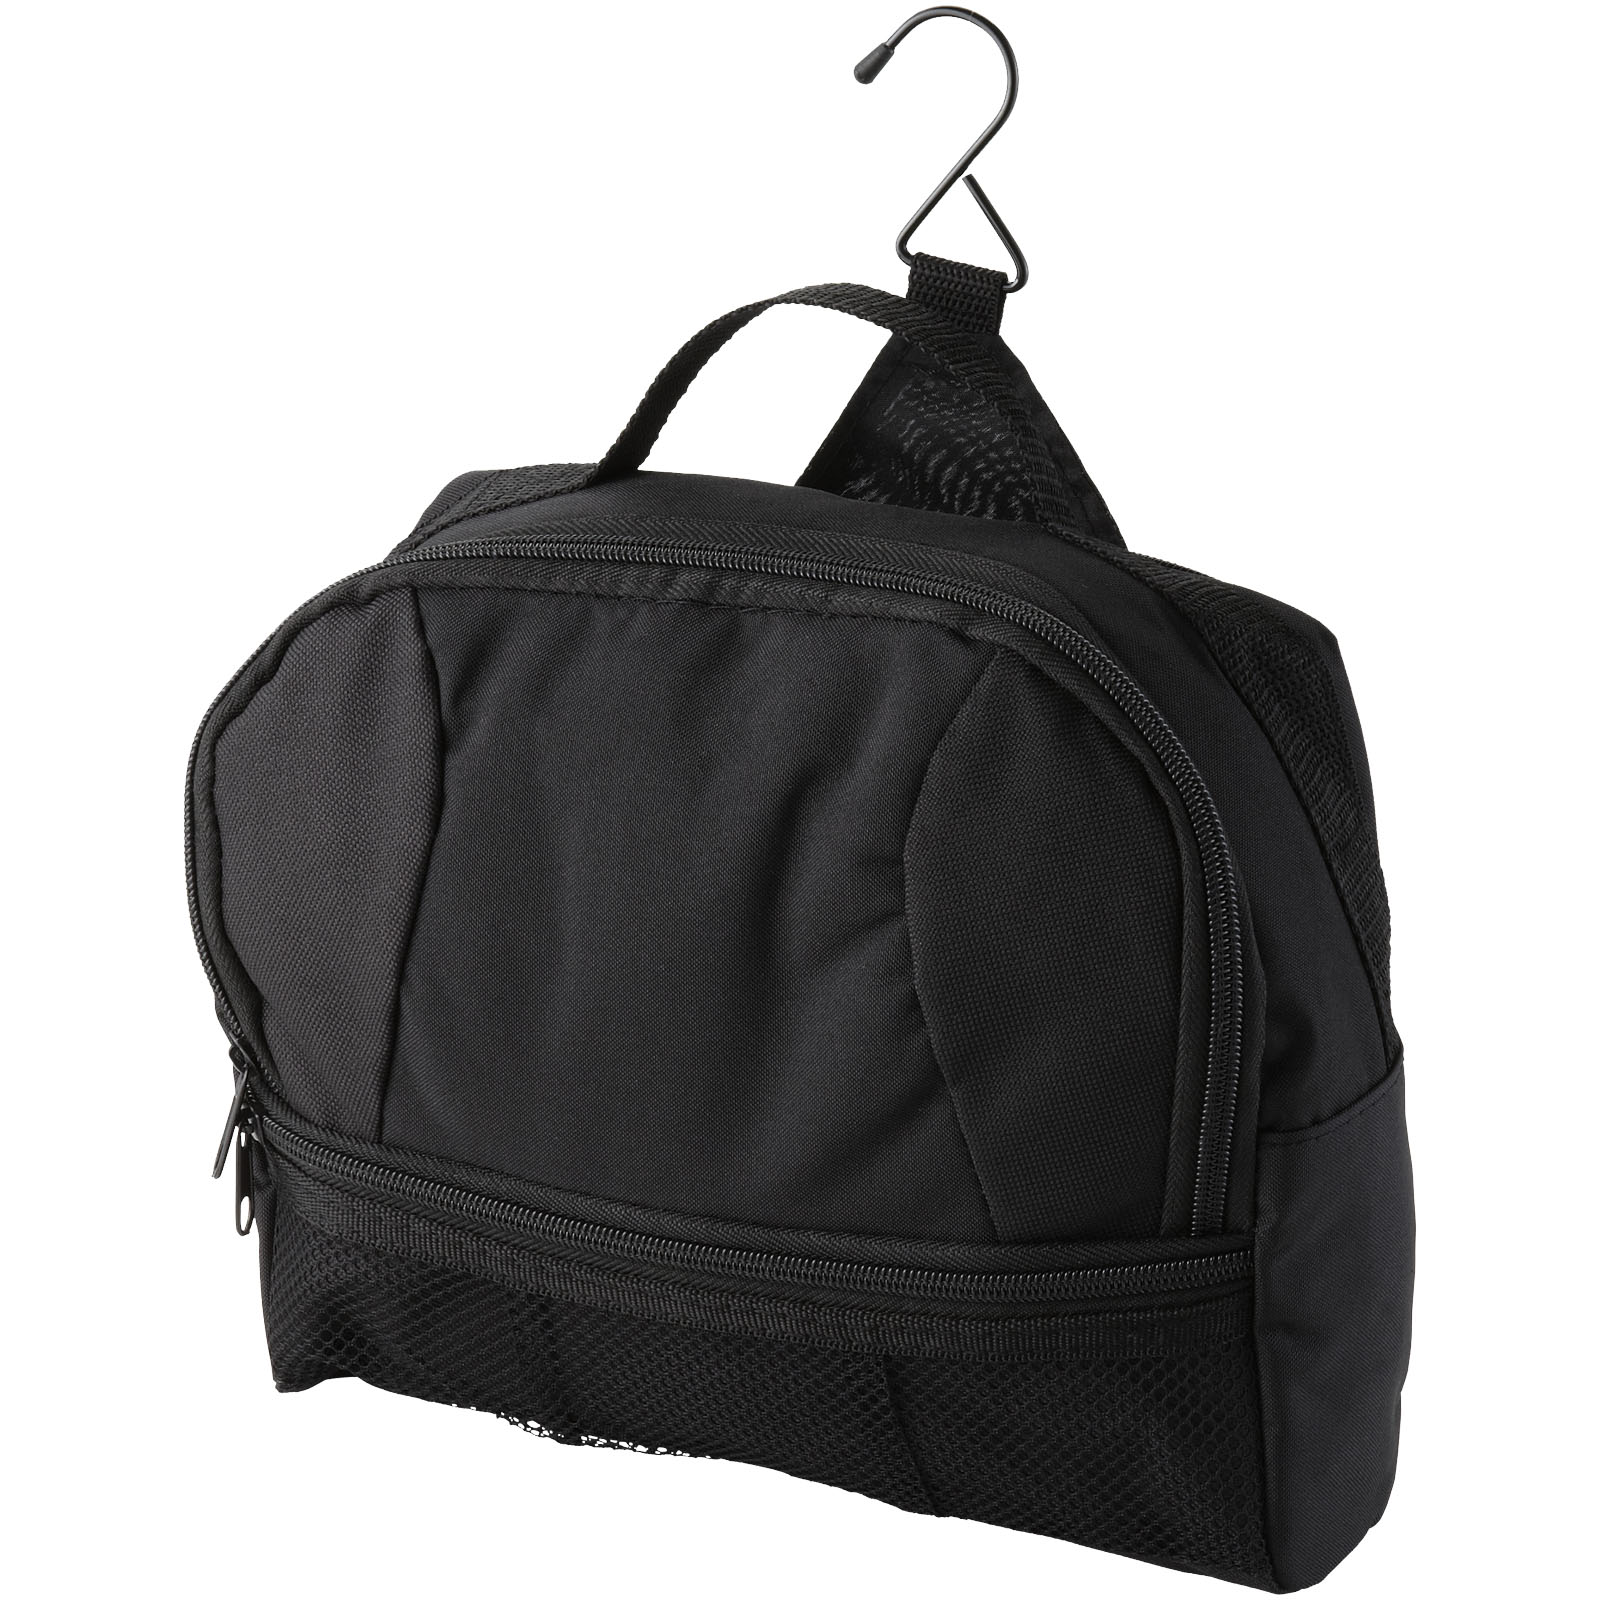 A toiletry bag designed to be hung up for convenient access when traveling. - Tunstall